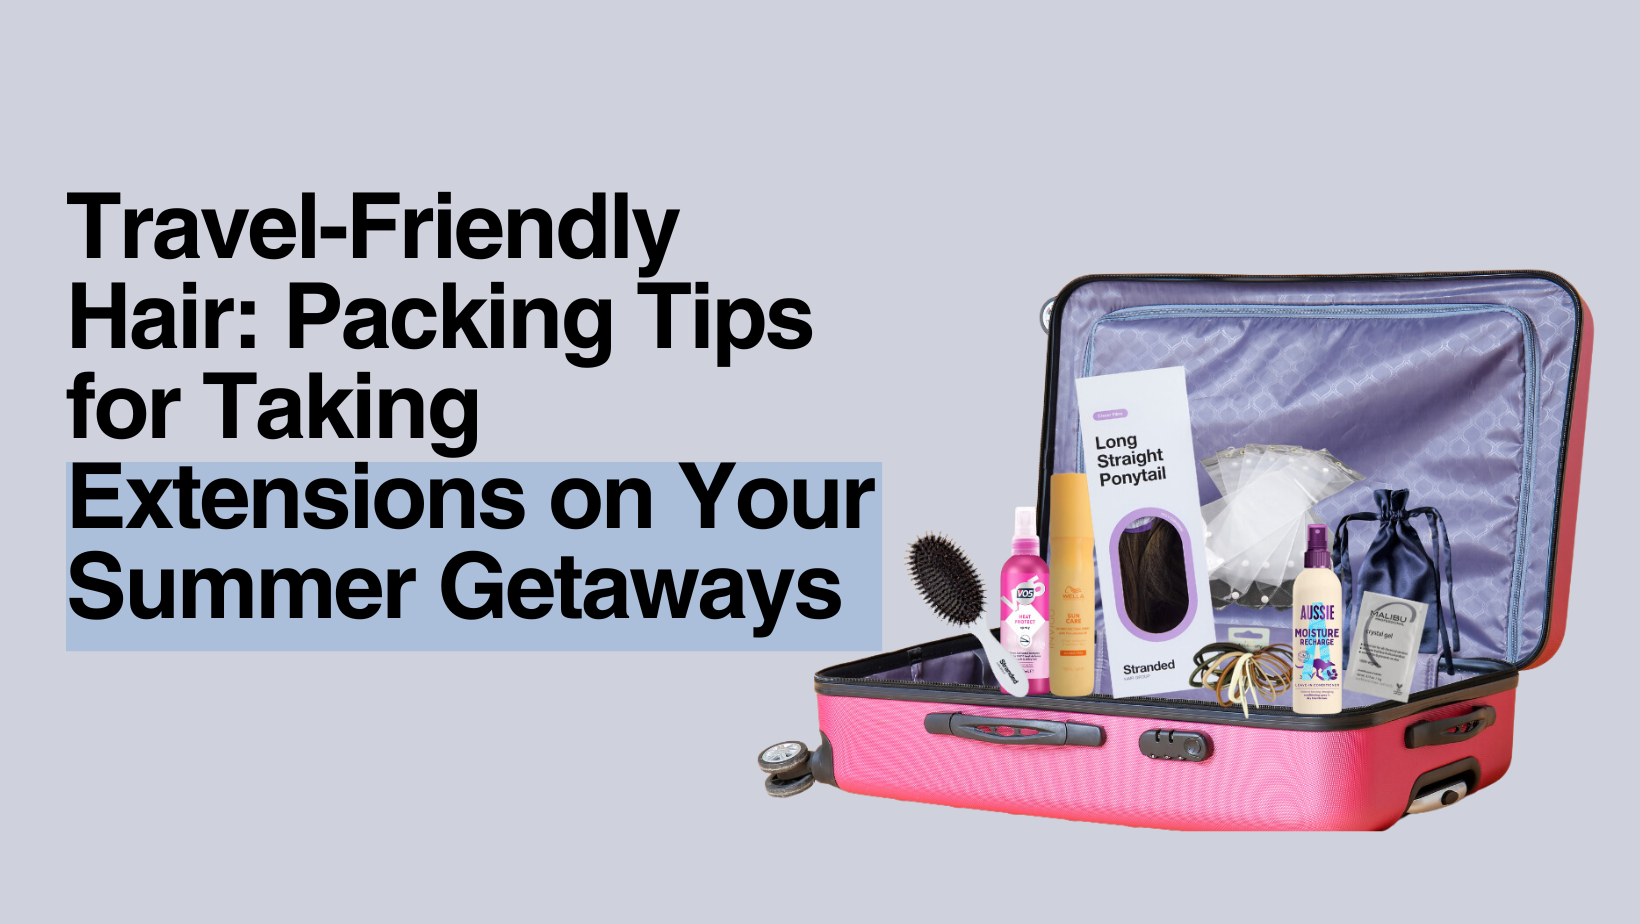 Packing Tips for Taking Extensions on Your Summer Getaways